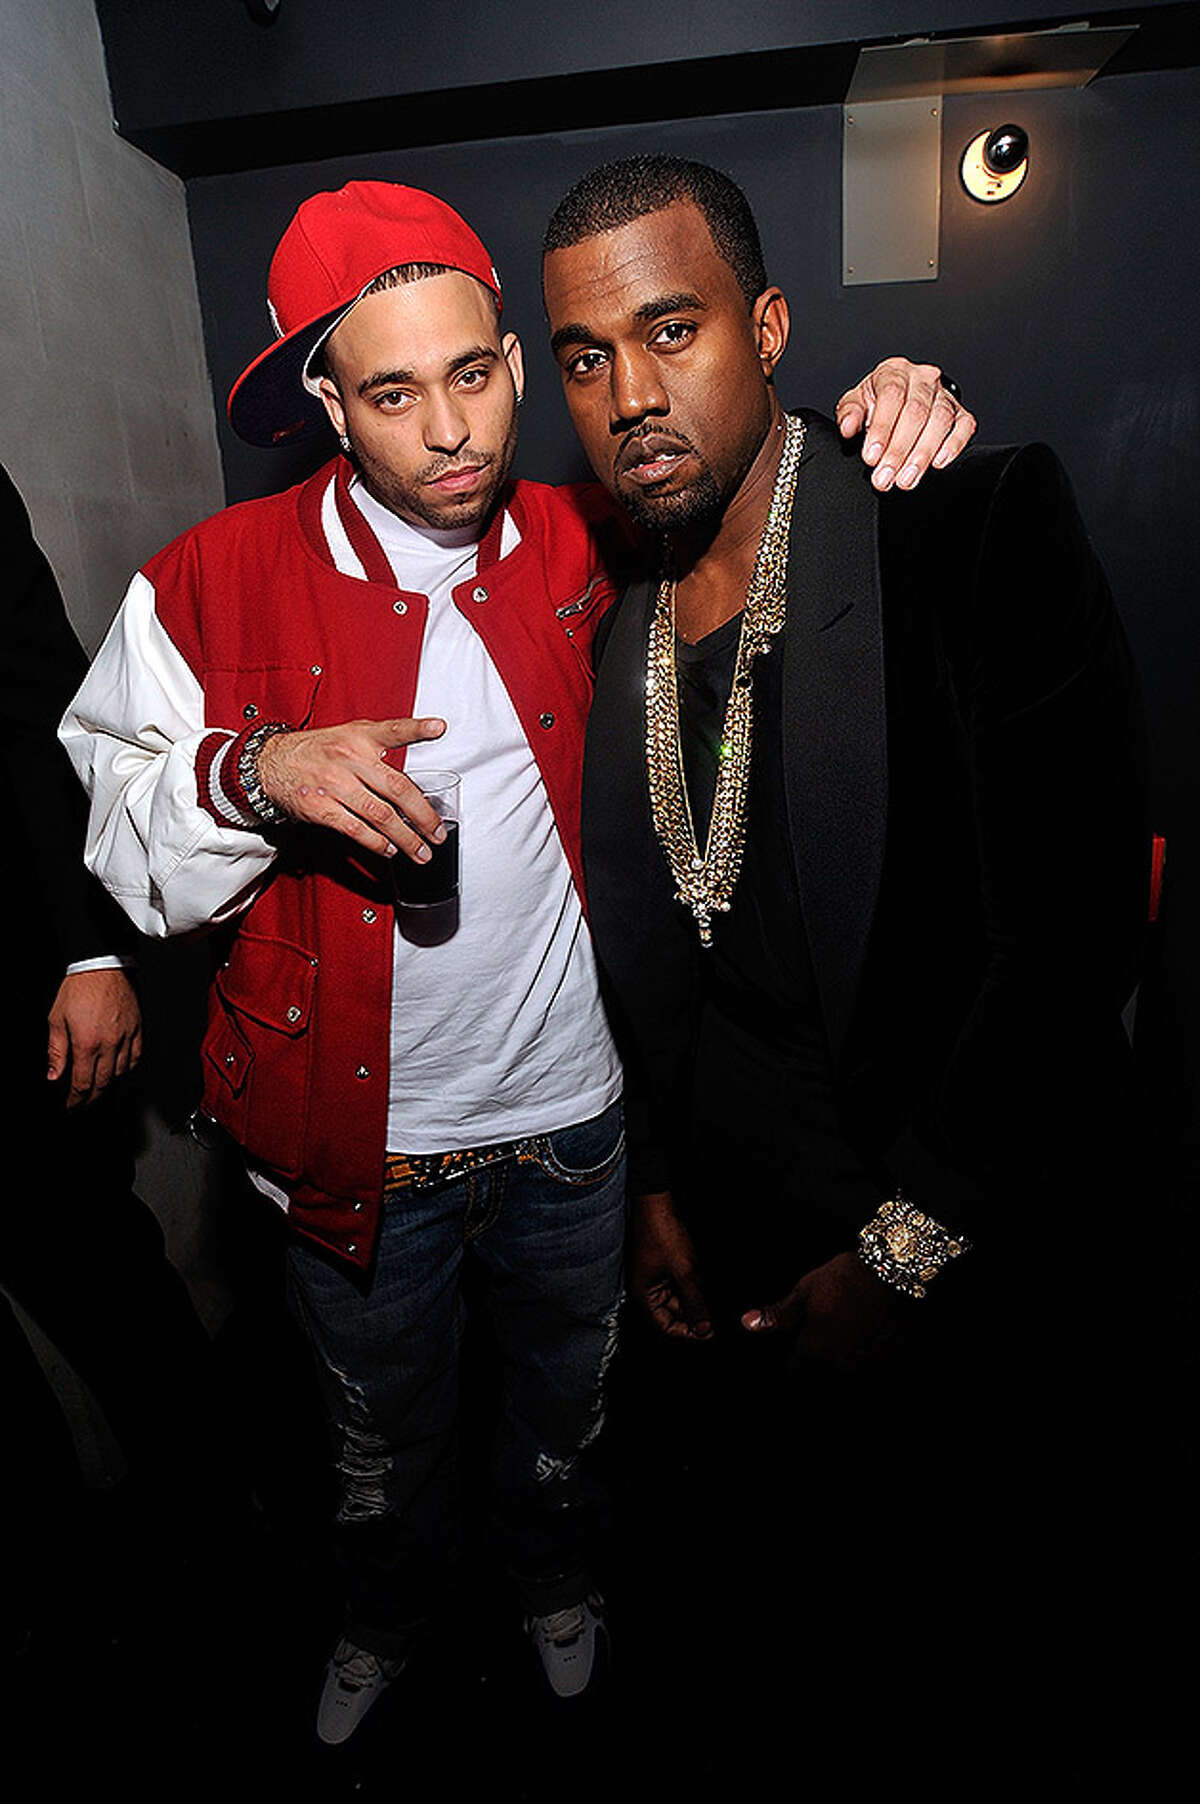 NEW YORK - OCTOBER 21: (R) Recording artist/filmmaker Kanye West poses for a photograph with a moviegoer at the New York Premiere of "Runaway" at Landmark Sunshine Theater on October 21, 2010 in New York City. (Photo by Joe Corrigan/Getty Images for Universal Music) *** Local Caption *** Kanye West